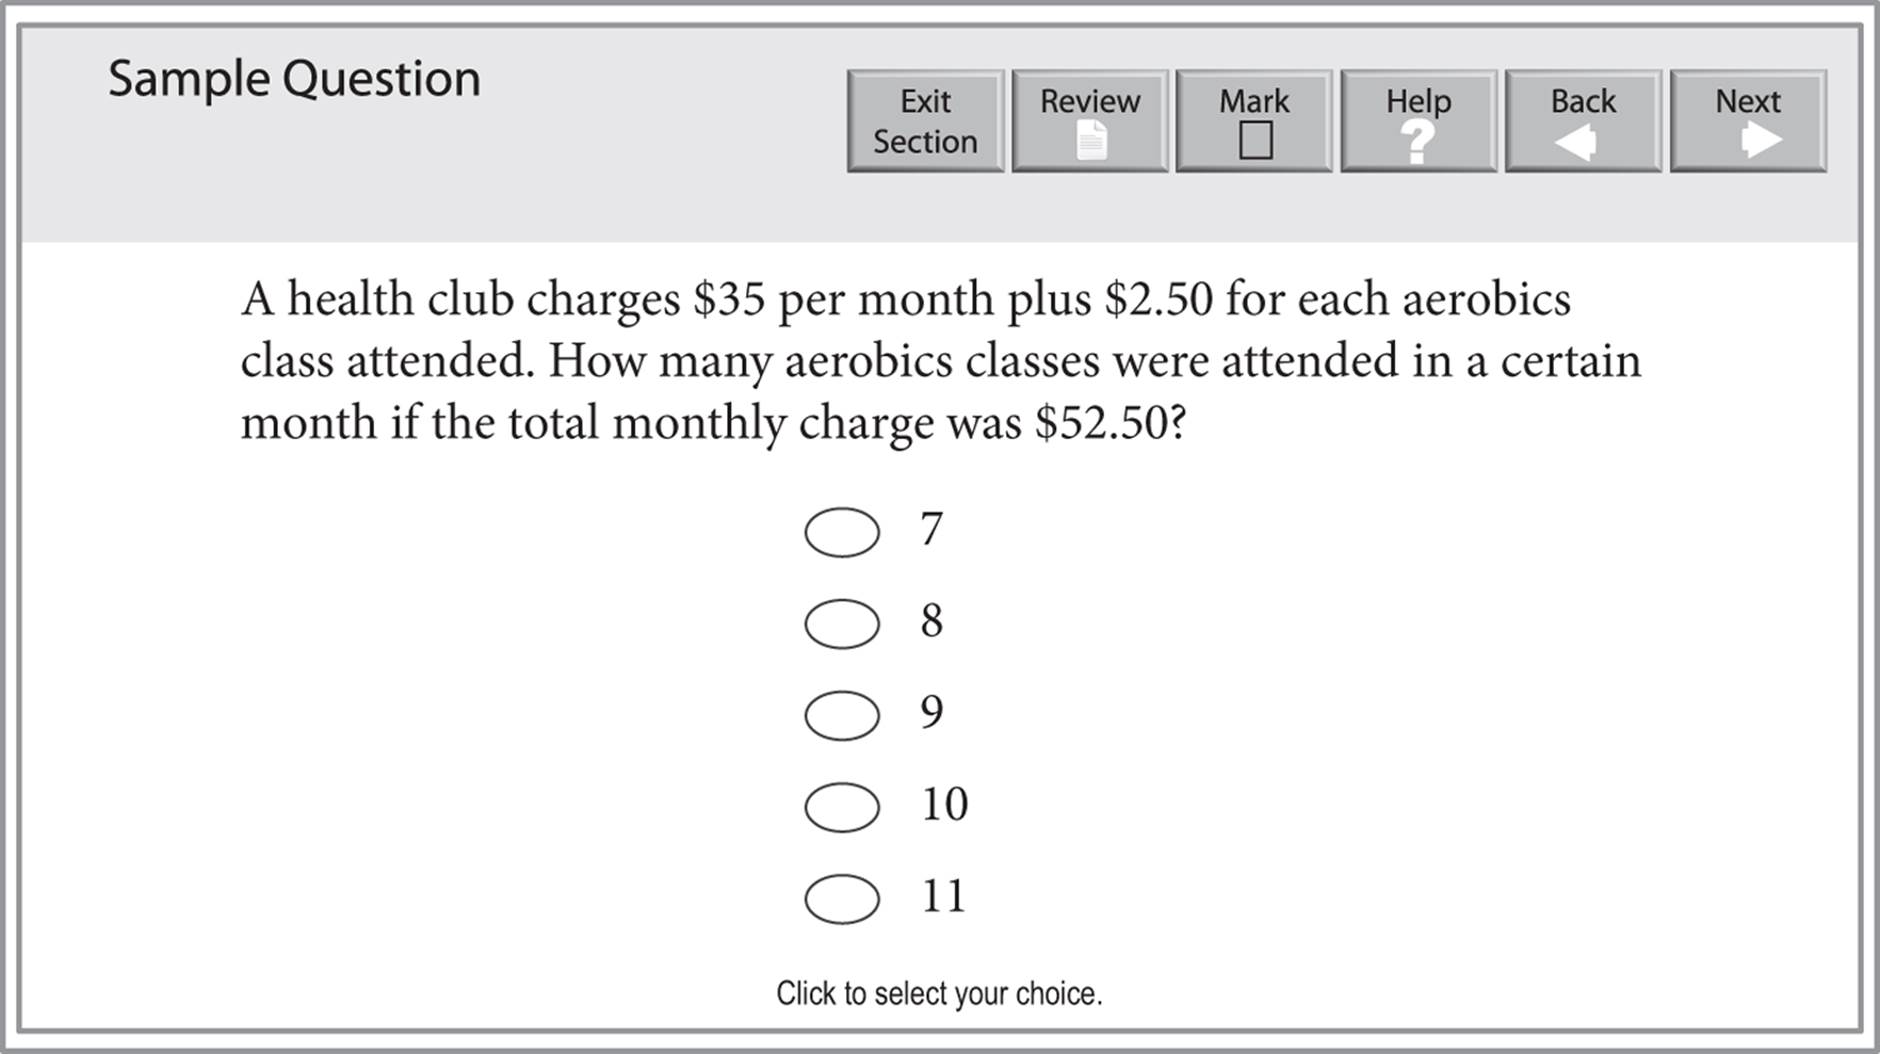 A problem solving question: "A health club charges $35 per month plus $2.50 for each aerobics class attended. How many aerobics classes were attended in a certain month if the total monthly charges was $52.50?" There are five choices for the answer: 7, 8, 9, 10, and 11.